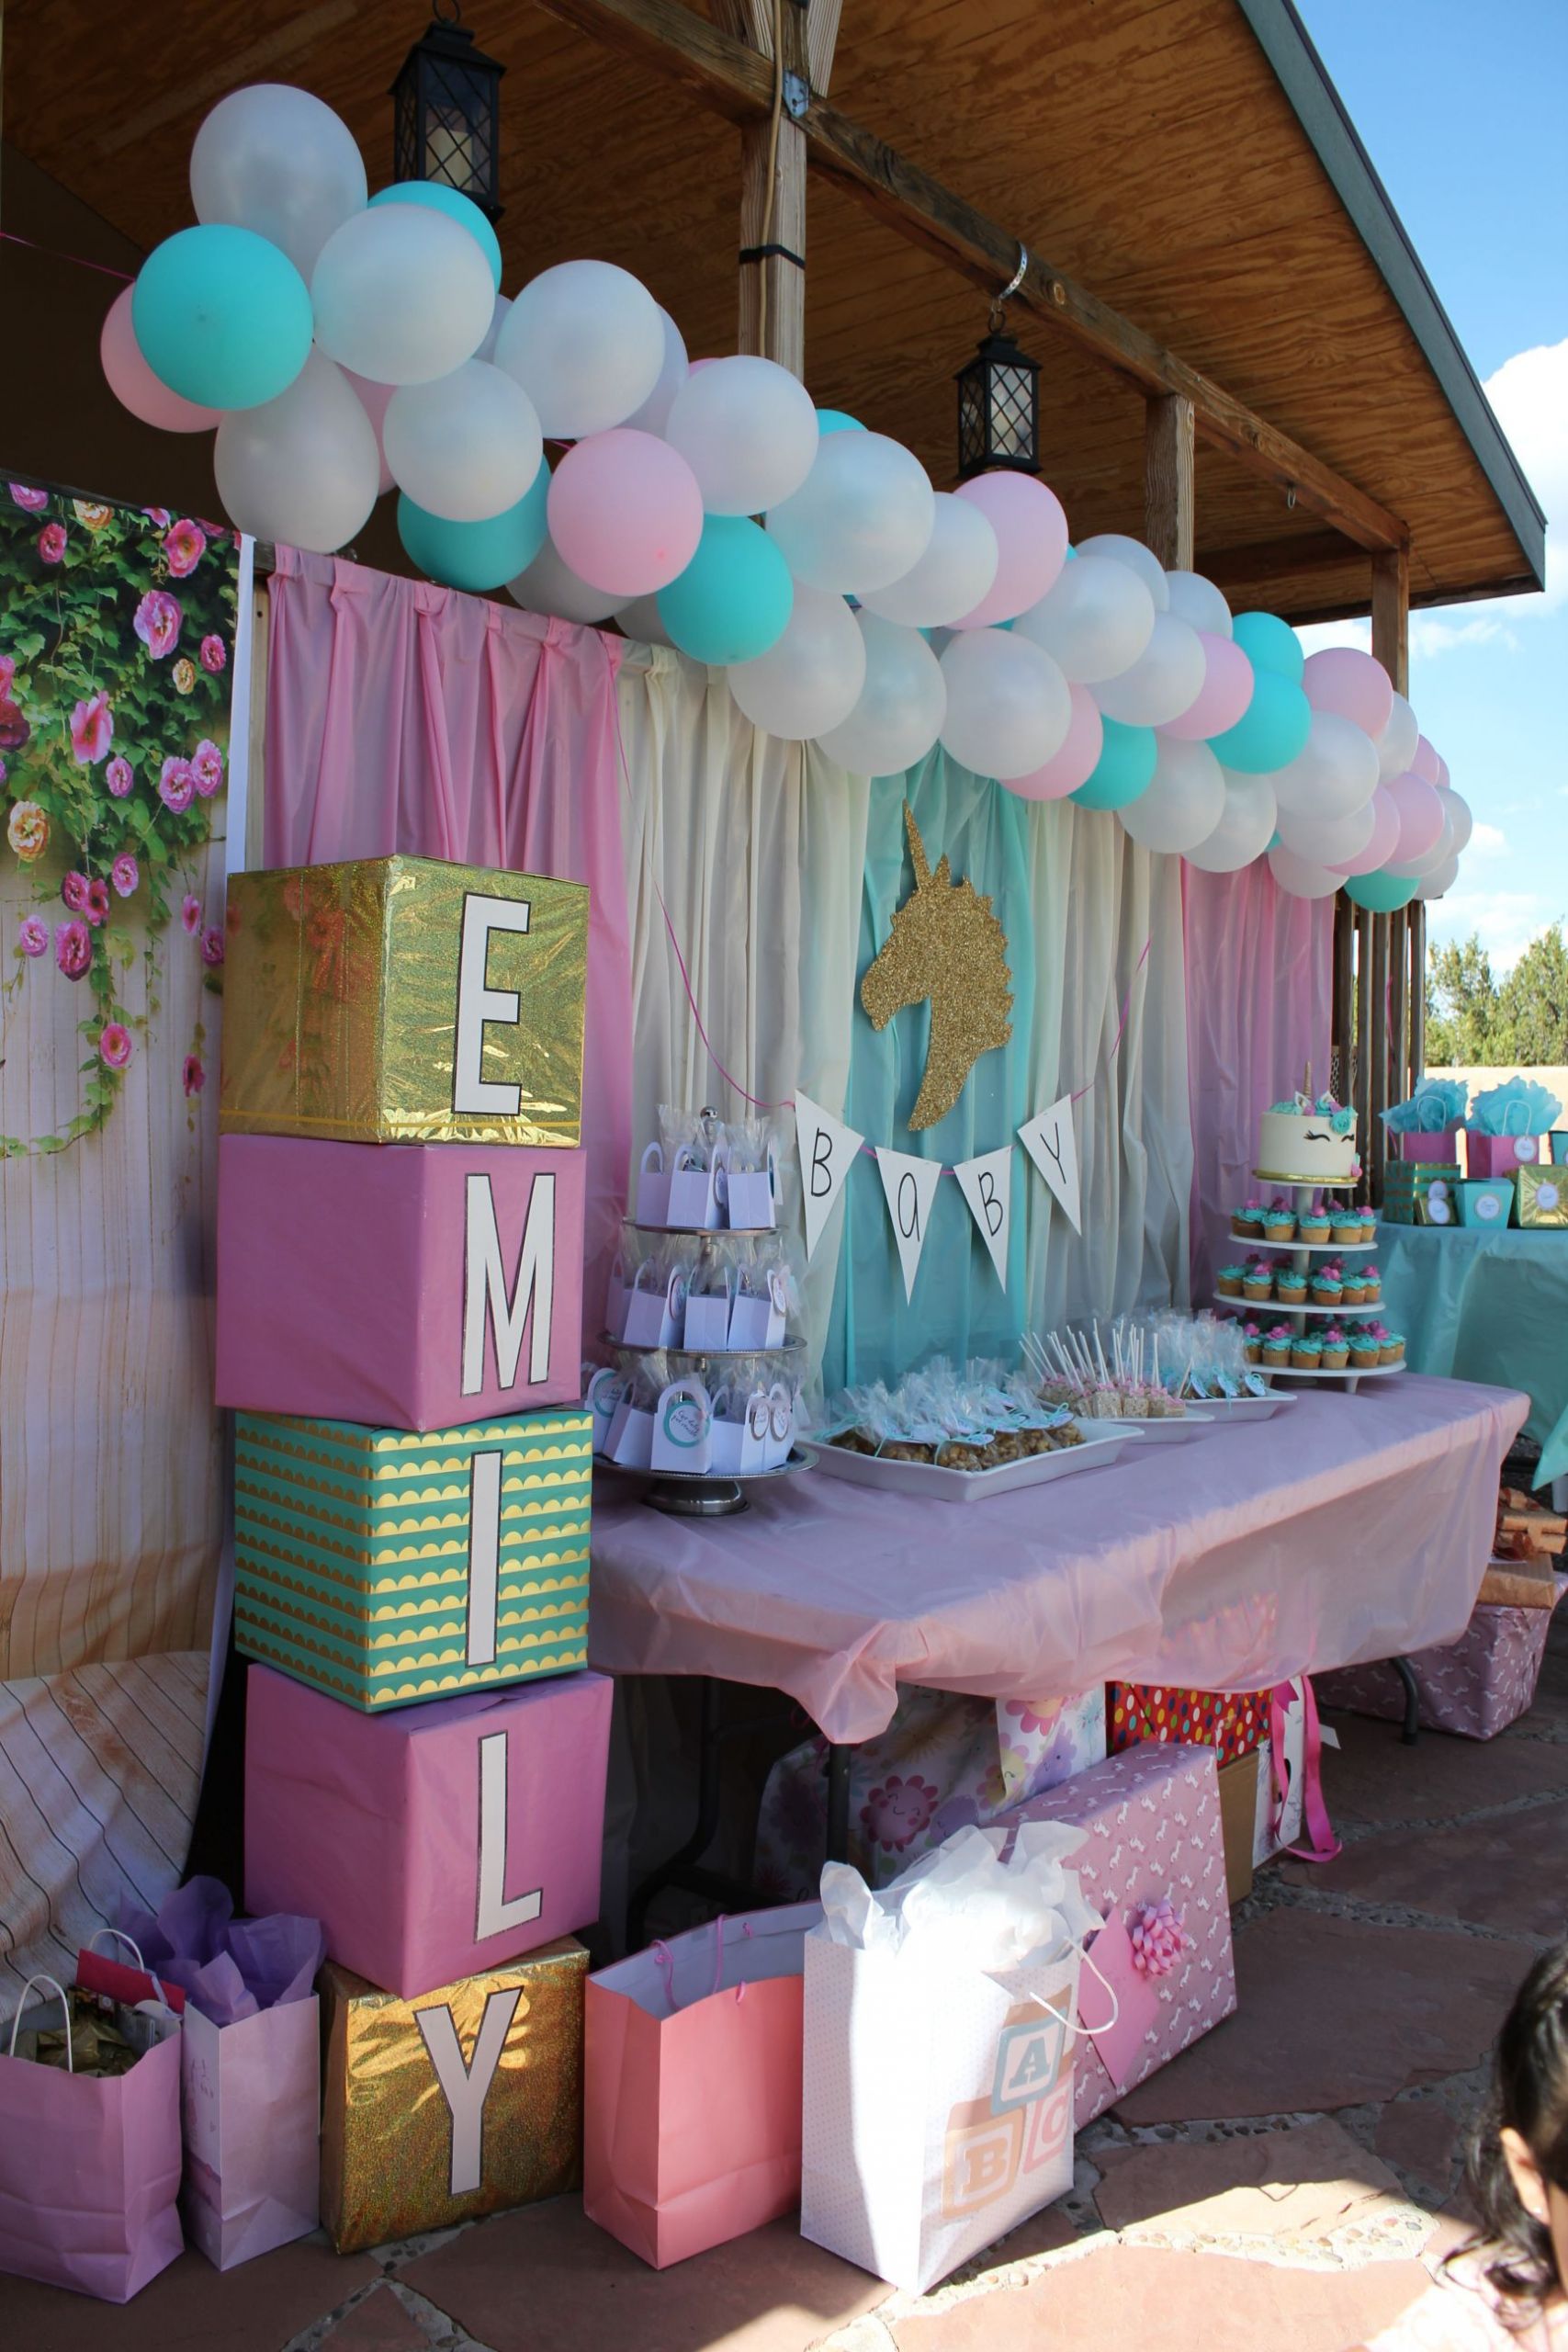 Baby Name Decoration Ideas
 Unicorn Baby Shower Backdrop with baby s name on blocks in